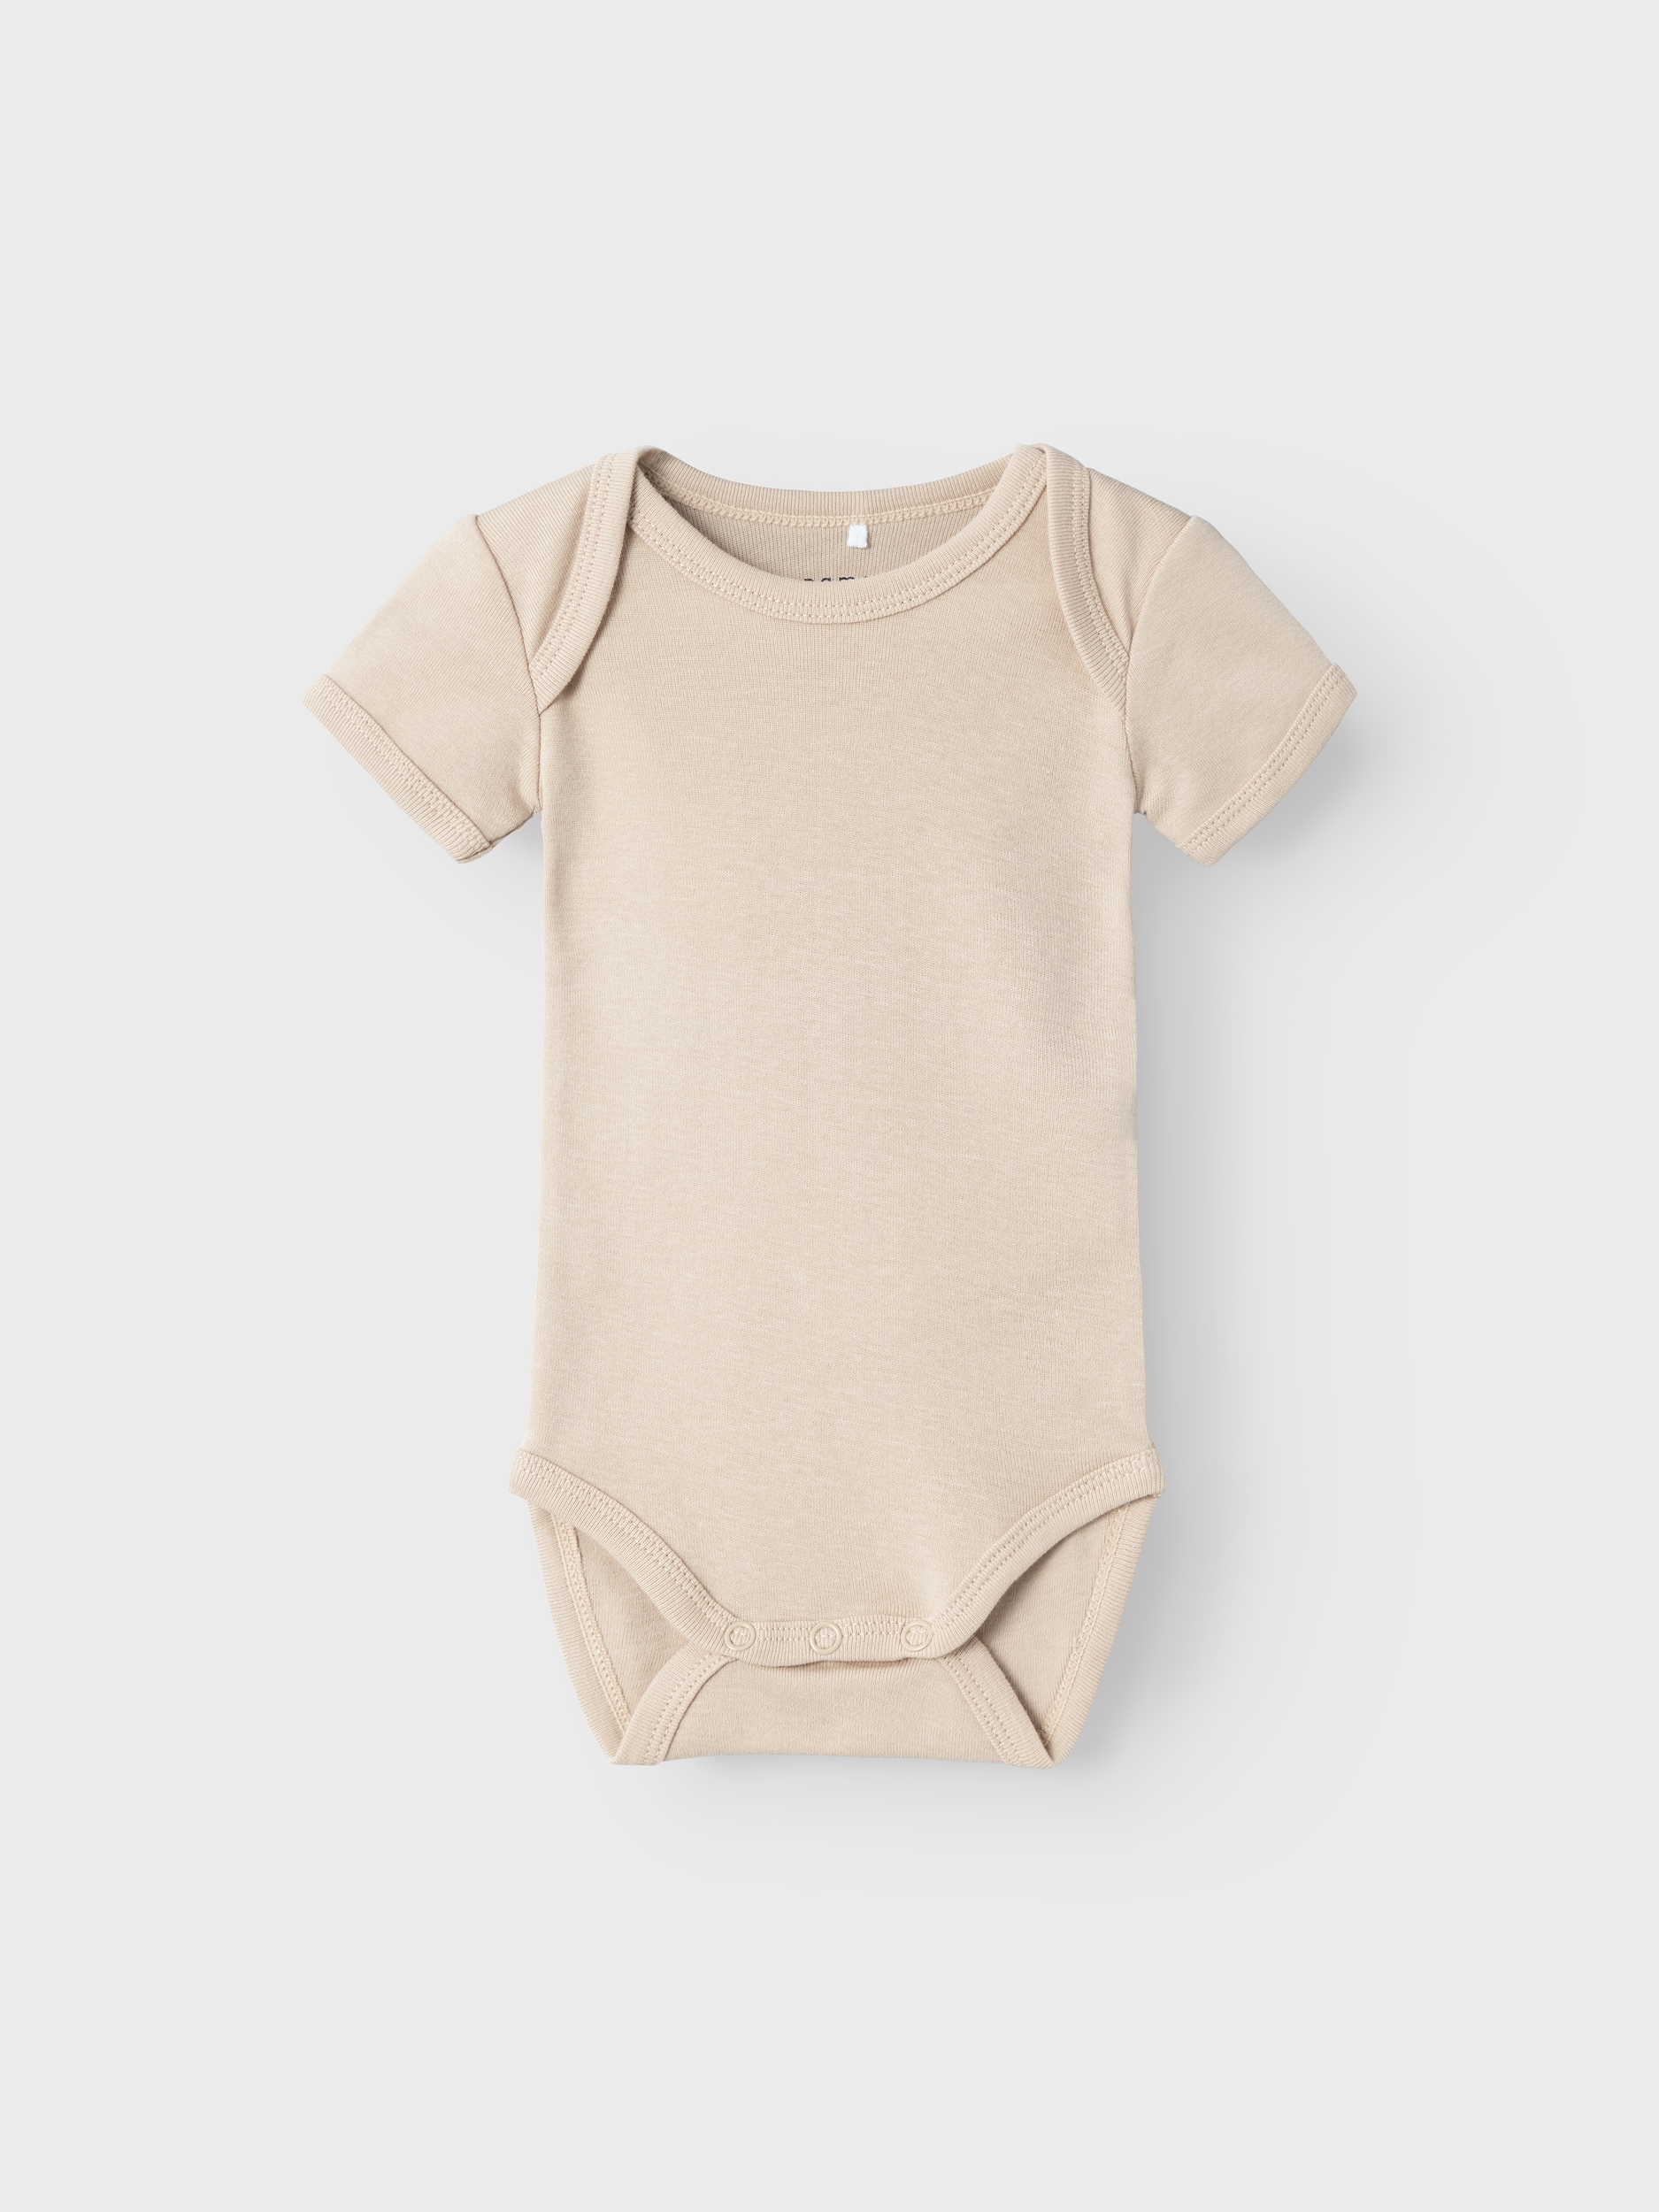 SS Body Name bei It ANIMAL BEIGE tlg.) 2 2P »NBNBODY (Packung, NOOS«, ♕